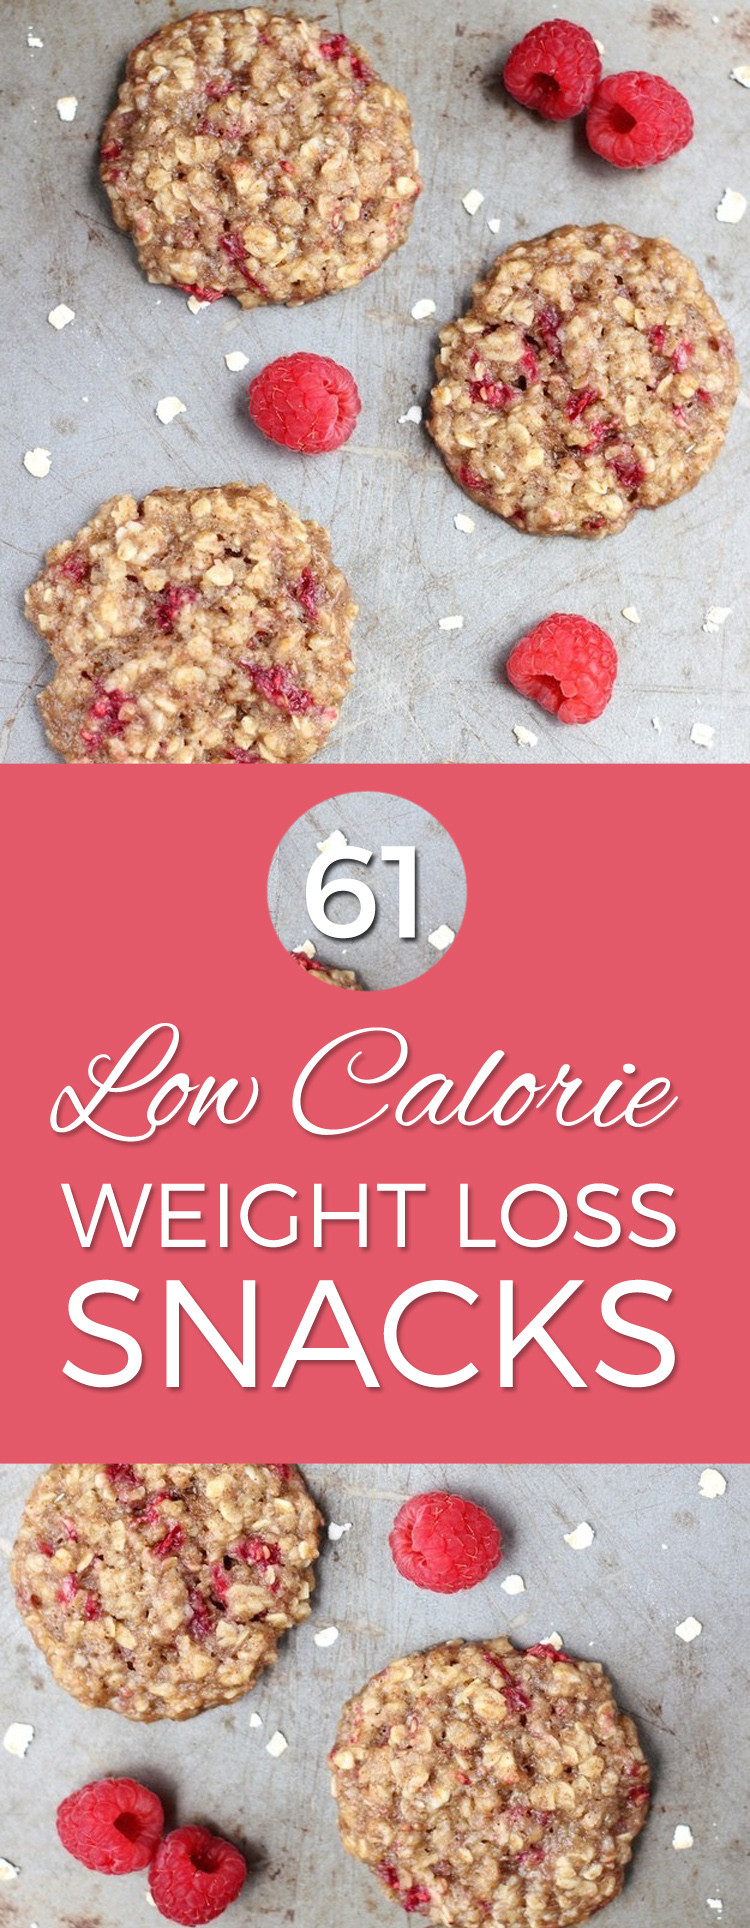 Healthy Low Calorie Snacks
 61 Super Healthy Super Low Calorie Snacks To Help You Lose